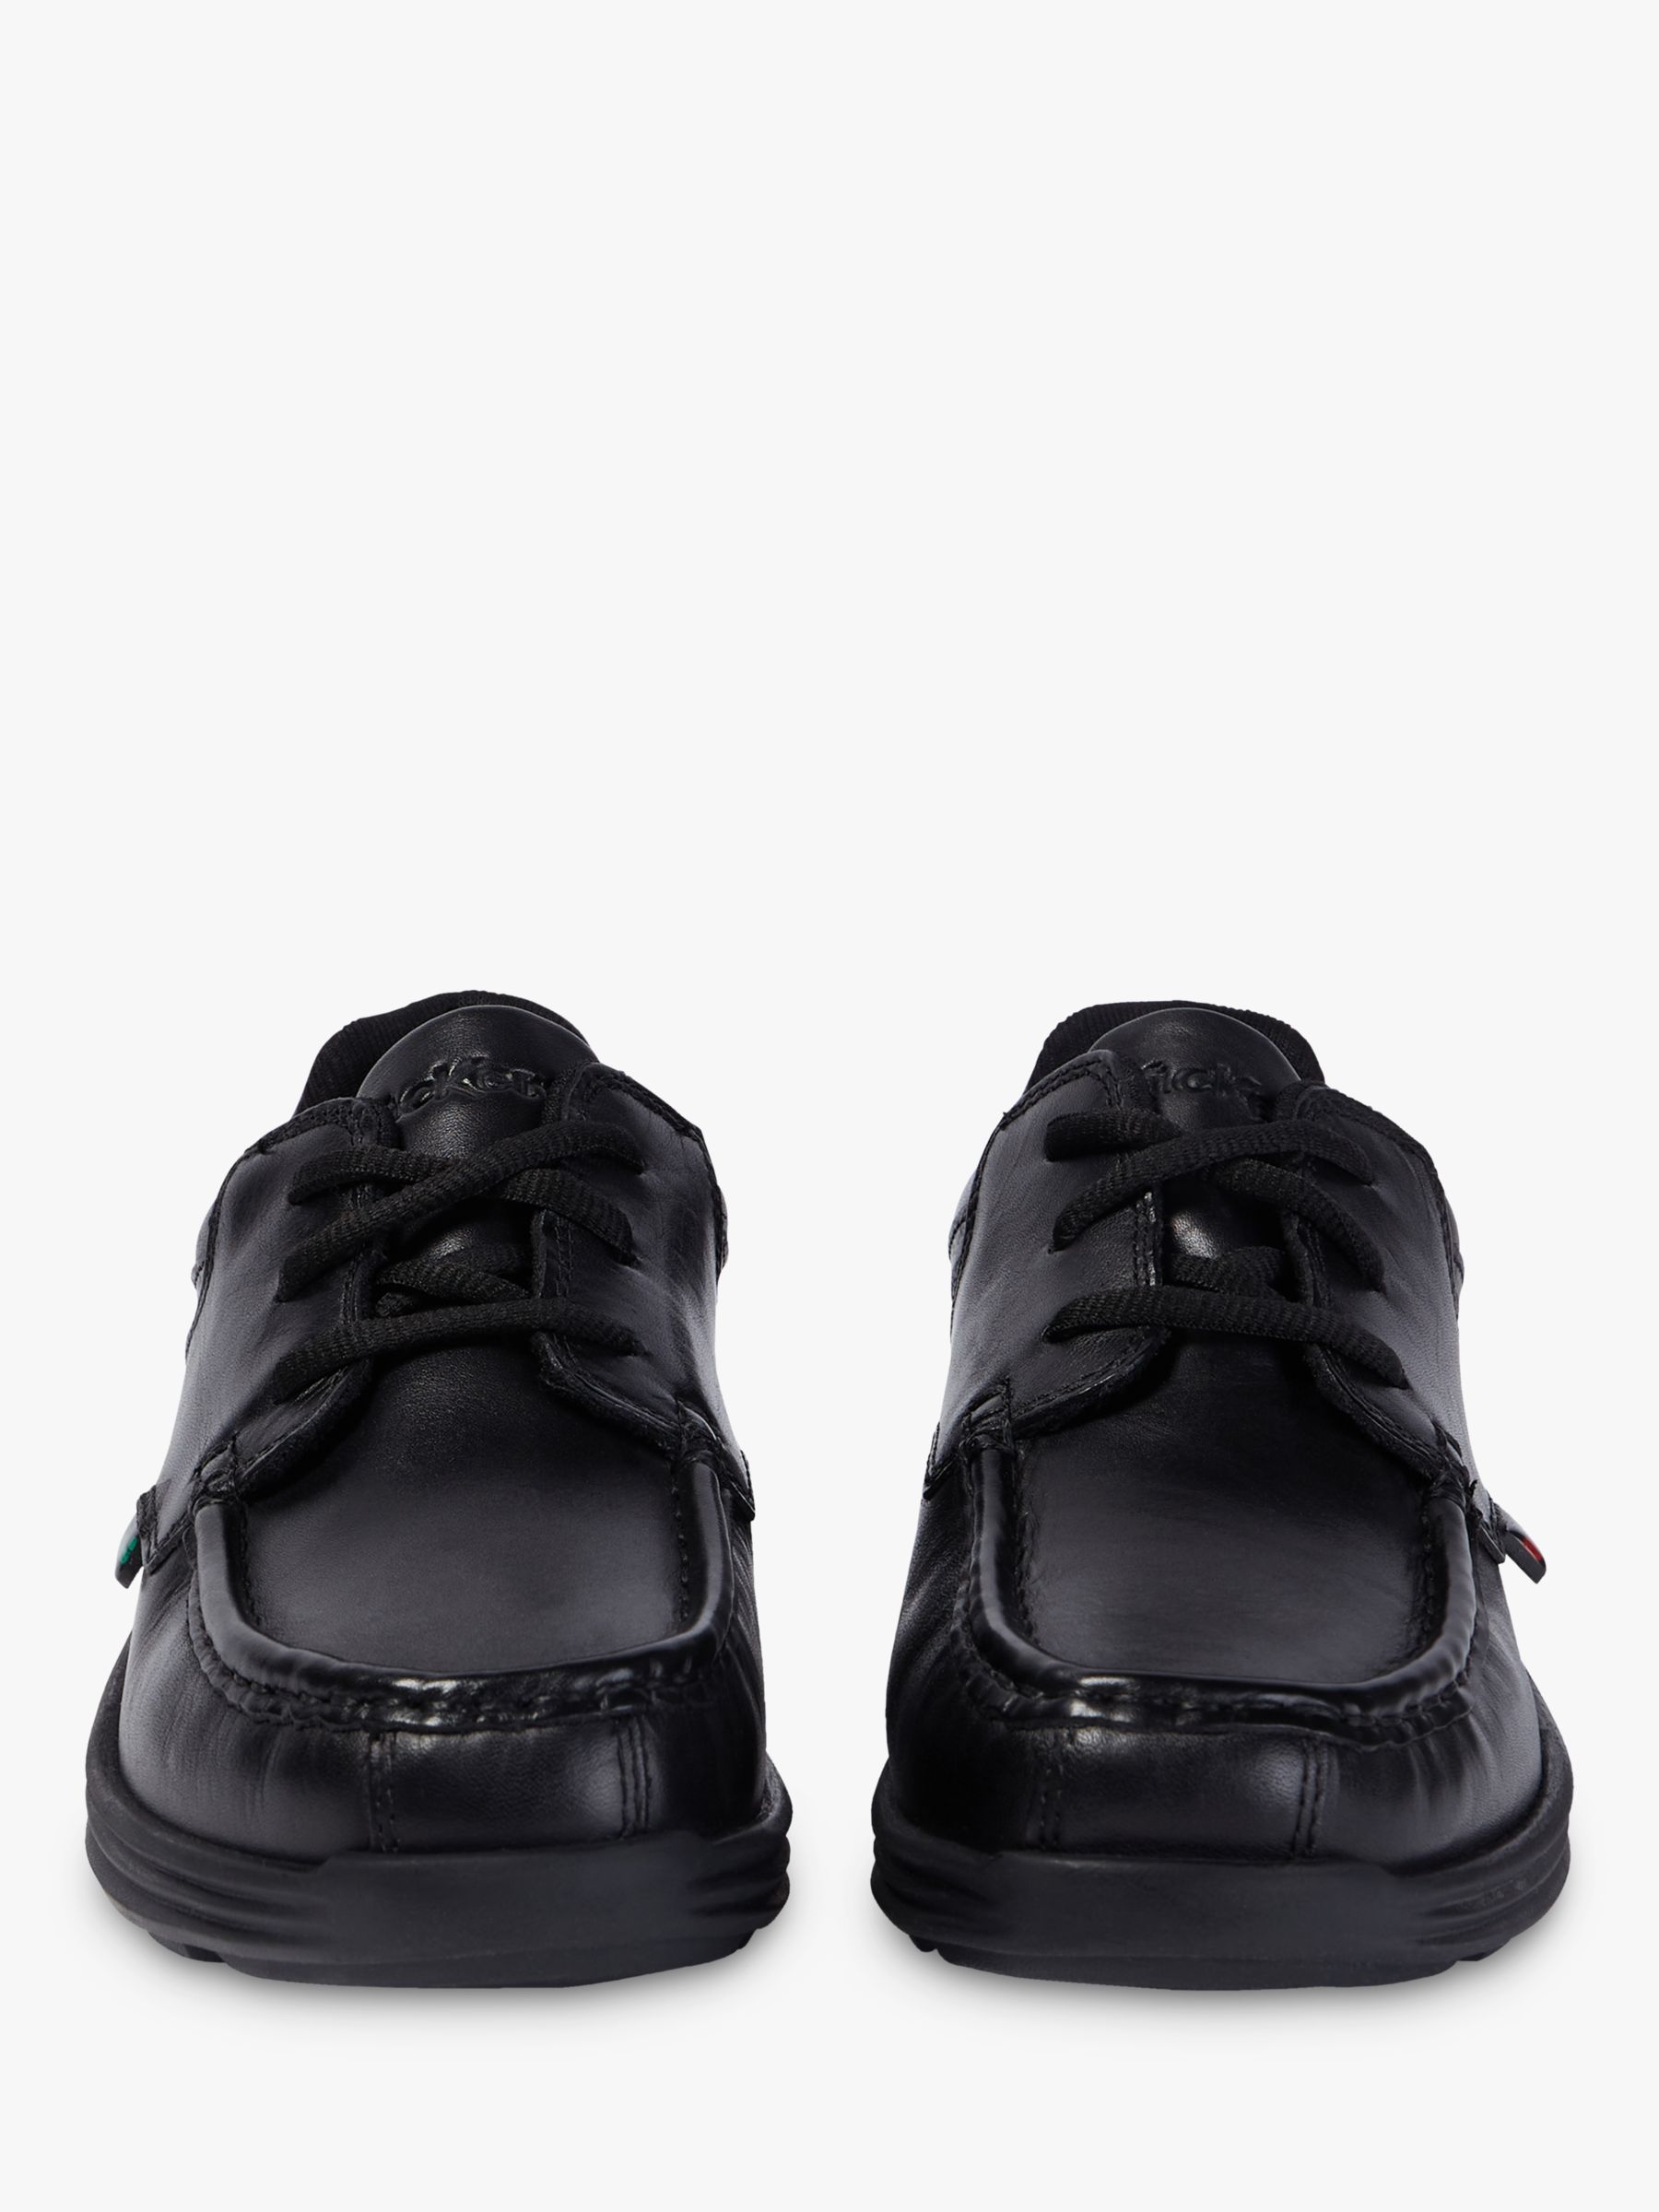 Buy Kickers Kids' Leather Reasan Laced Shoes, Black Online at johnlewis.com